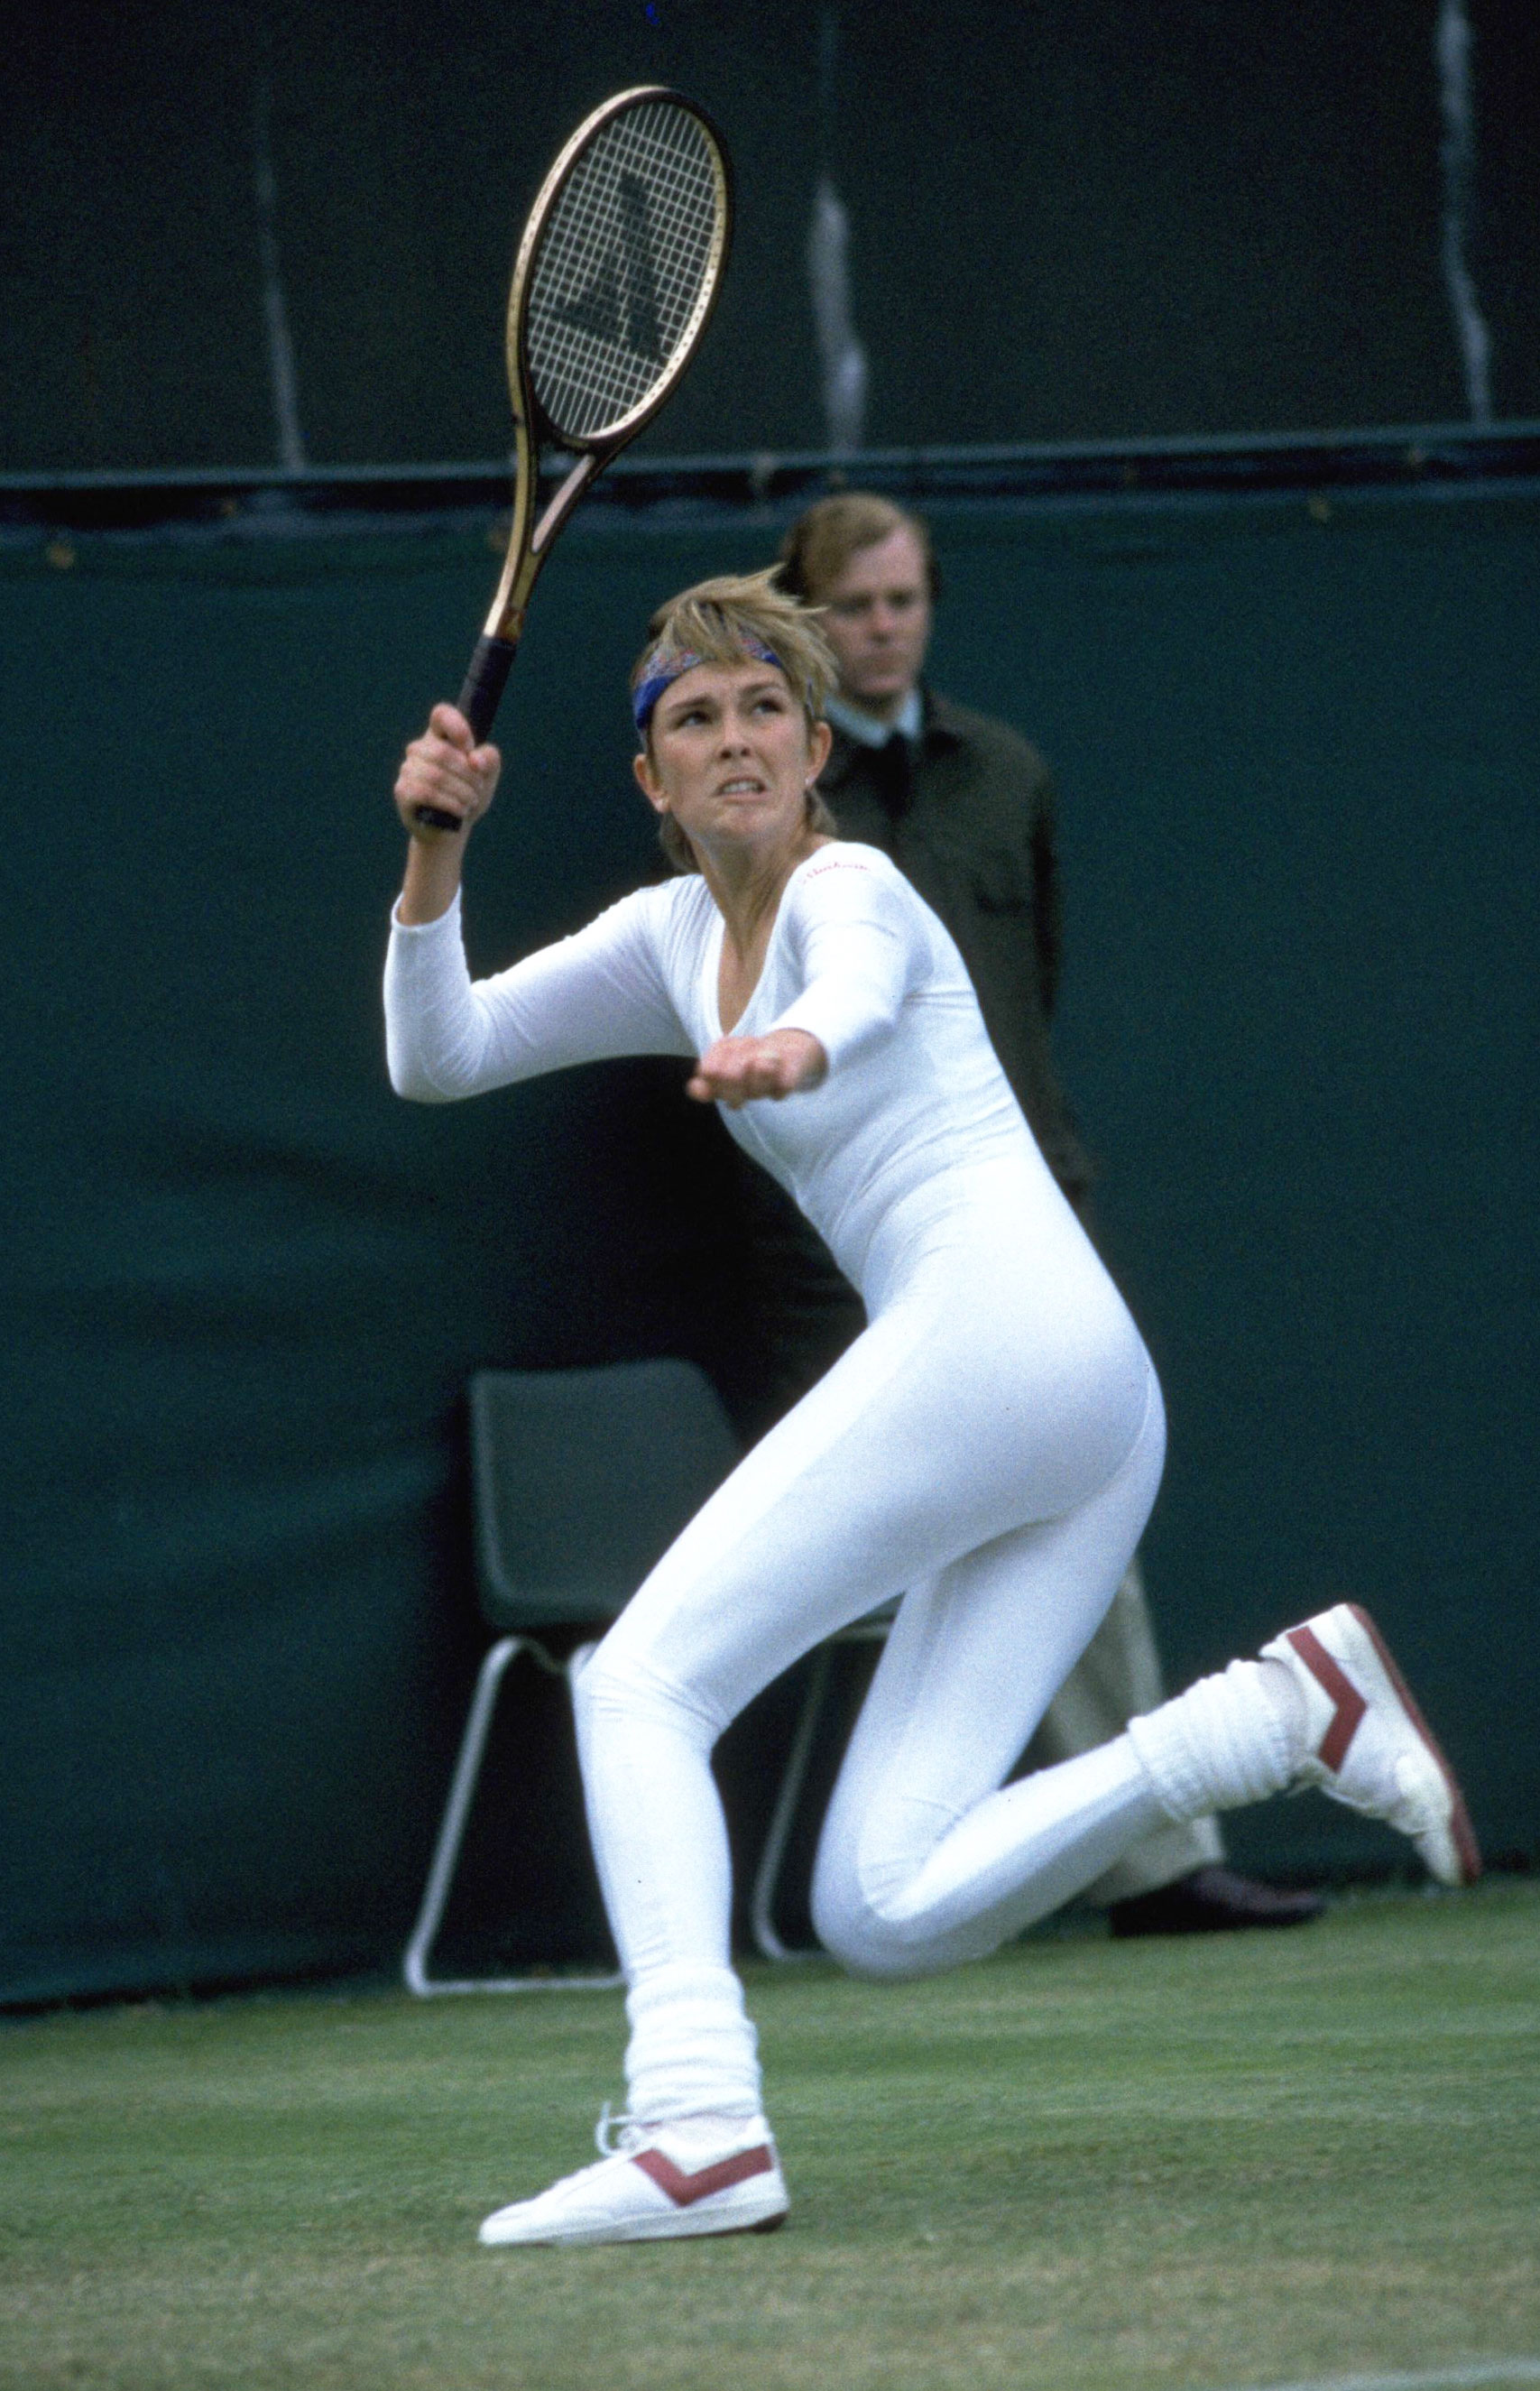 Anne White's 1985 unitard did indeed adhere to the all-white rule, however it is still considered one of Wimbledon's most controversial outfits. After the match was suspended, Wimbledon officials asked that she return in a more conventional outfit.